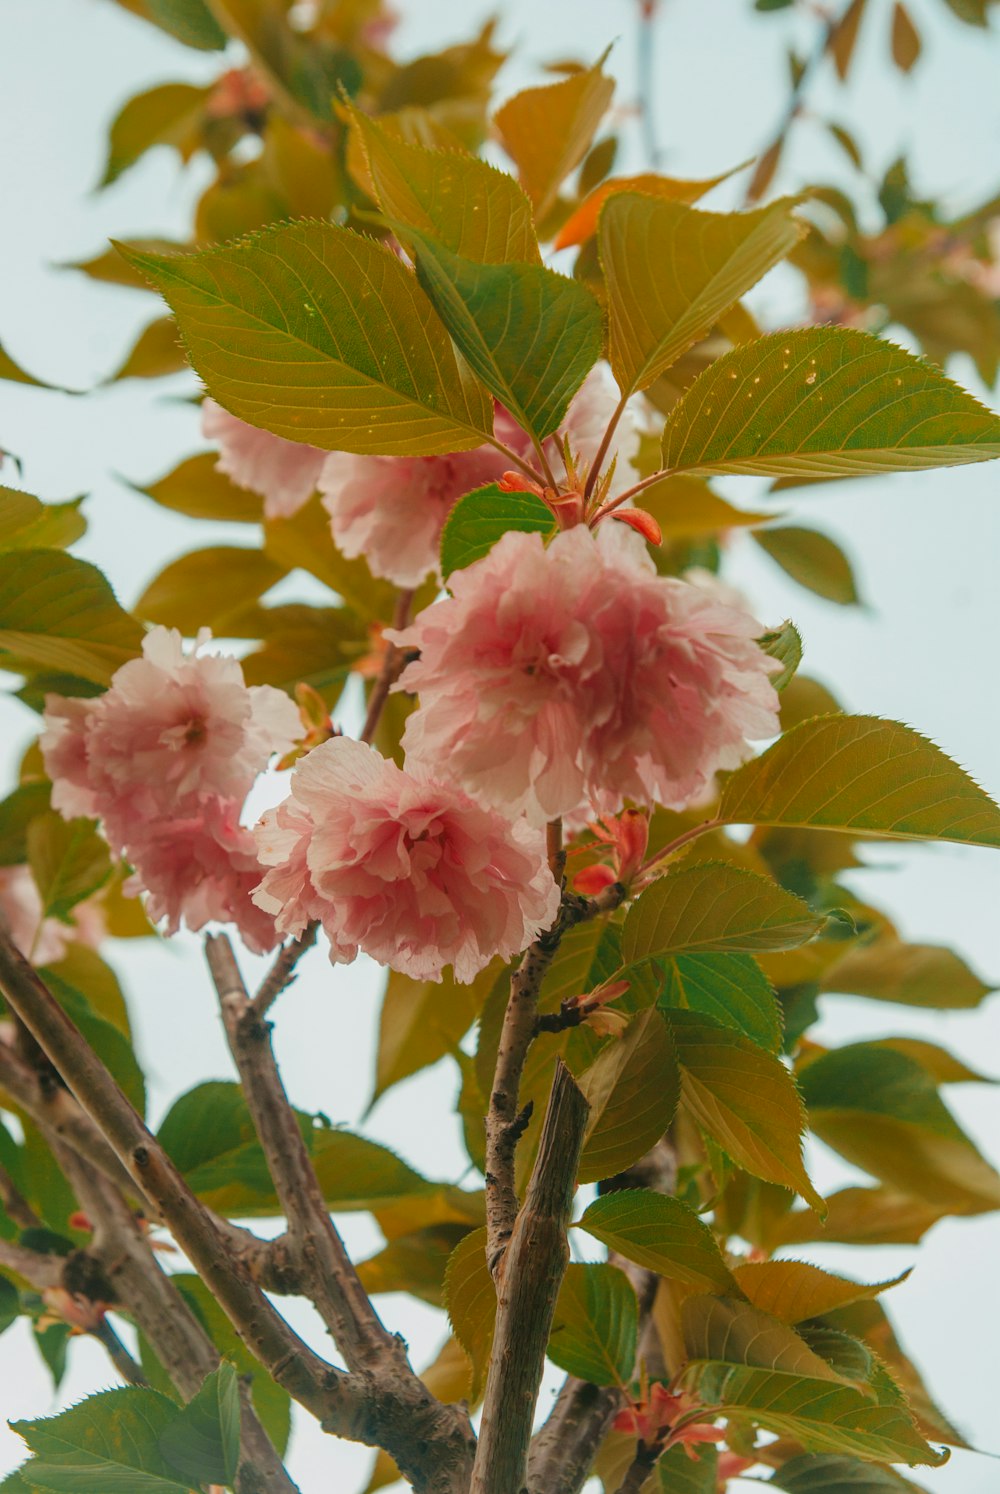 a tree with pink flowers and green leaves